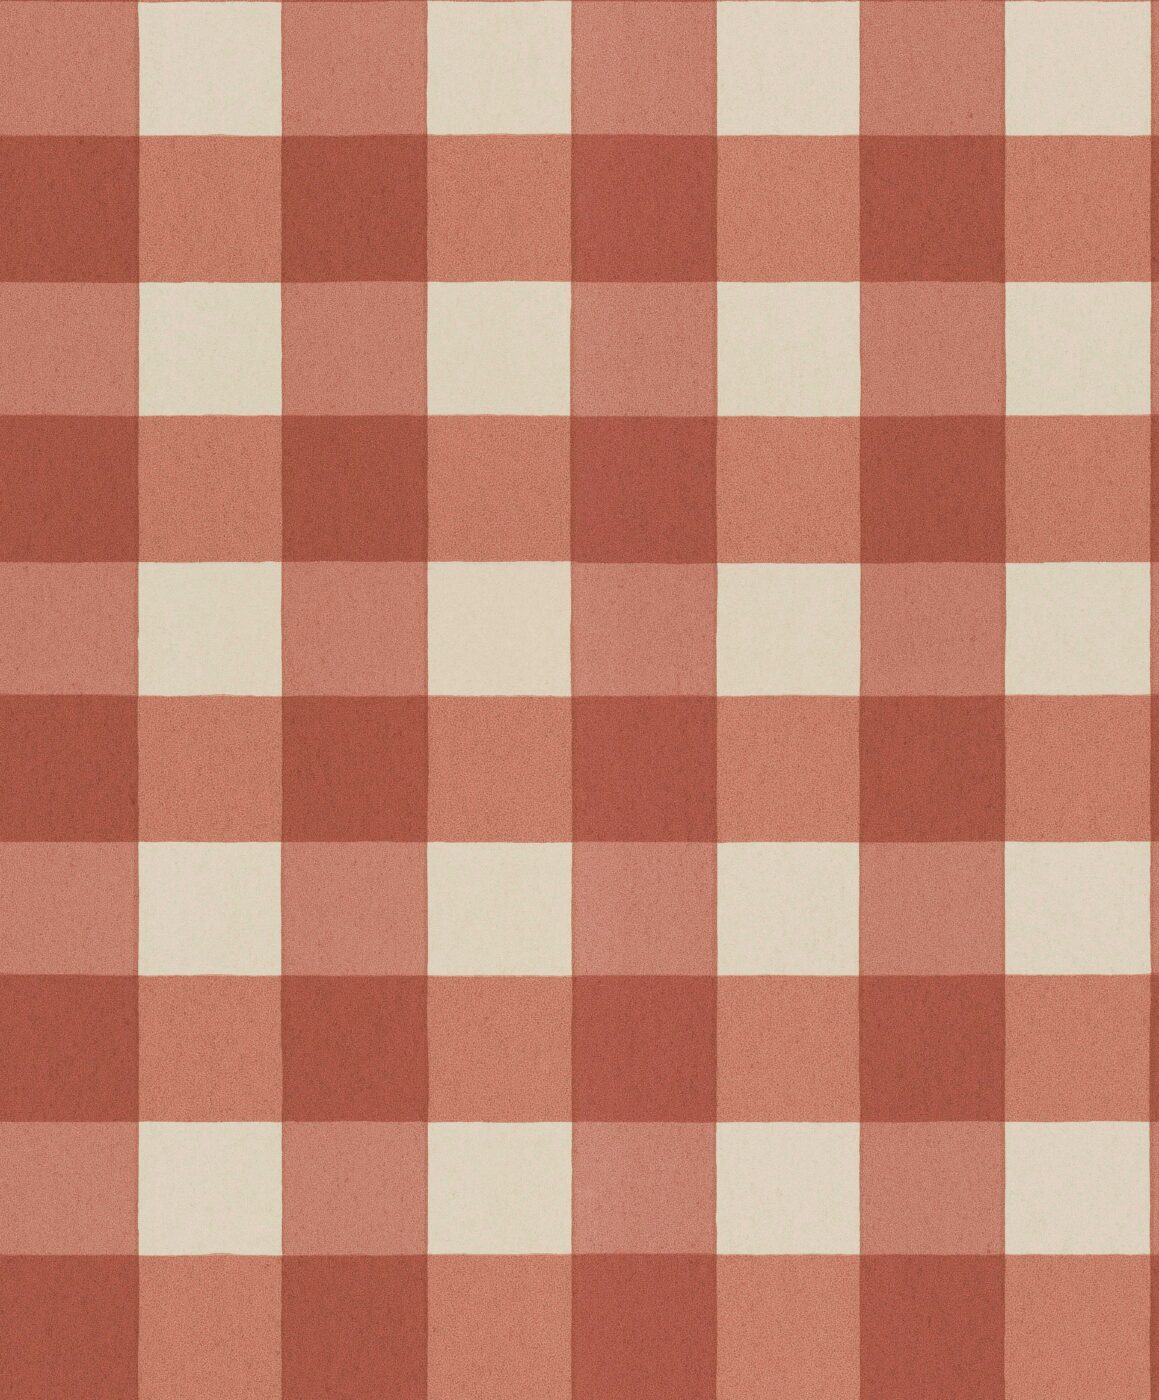 The inspiration to Picnic wallpaper comes from the traditional plain-woven checked fabrics called Gingham in English, or Toile de Vichy in French.